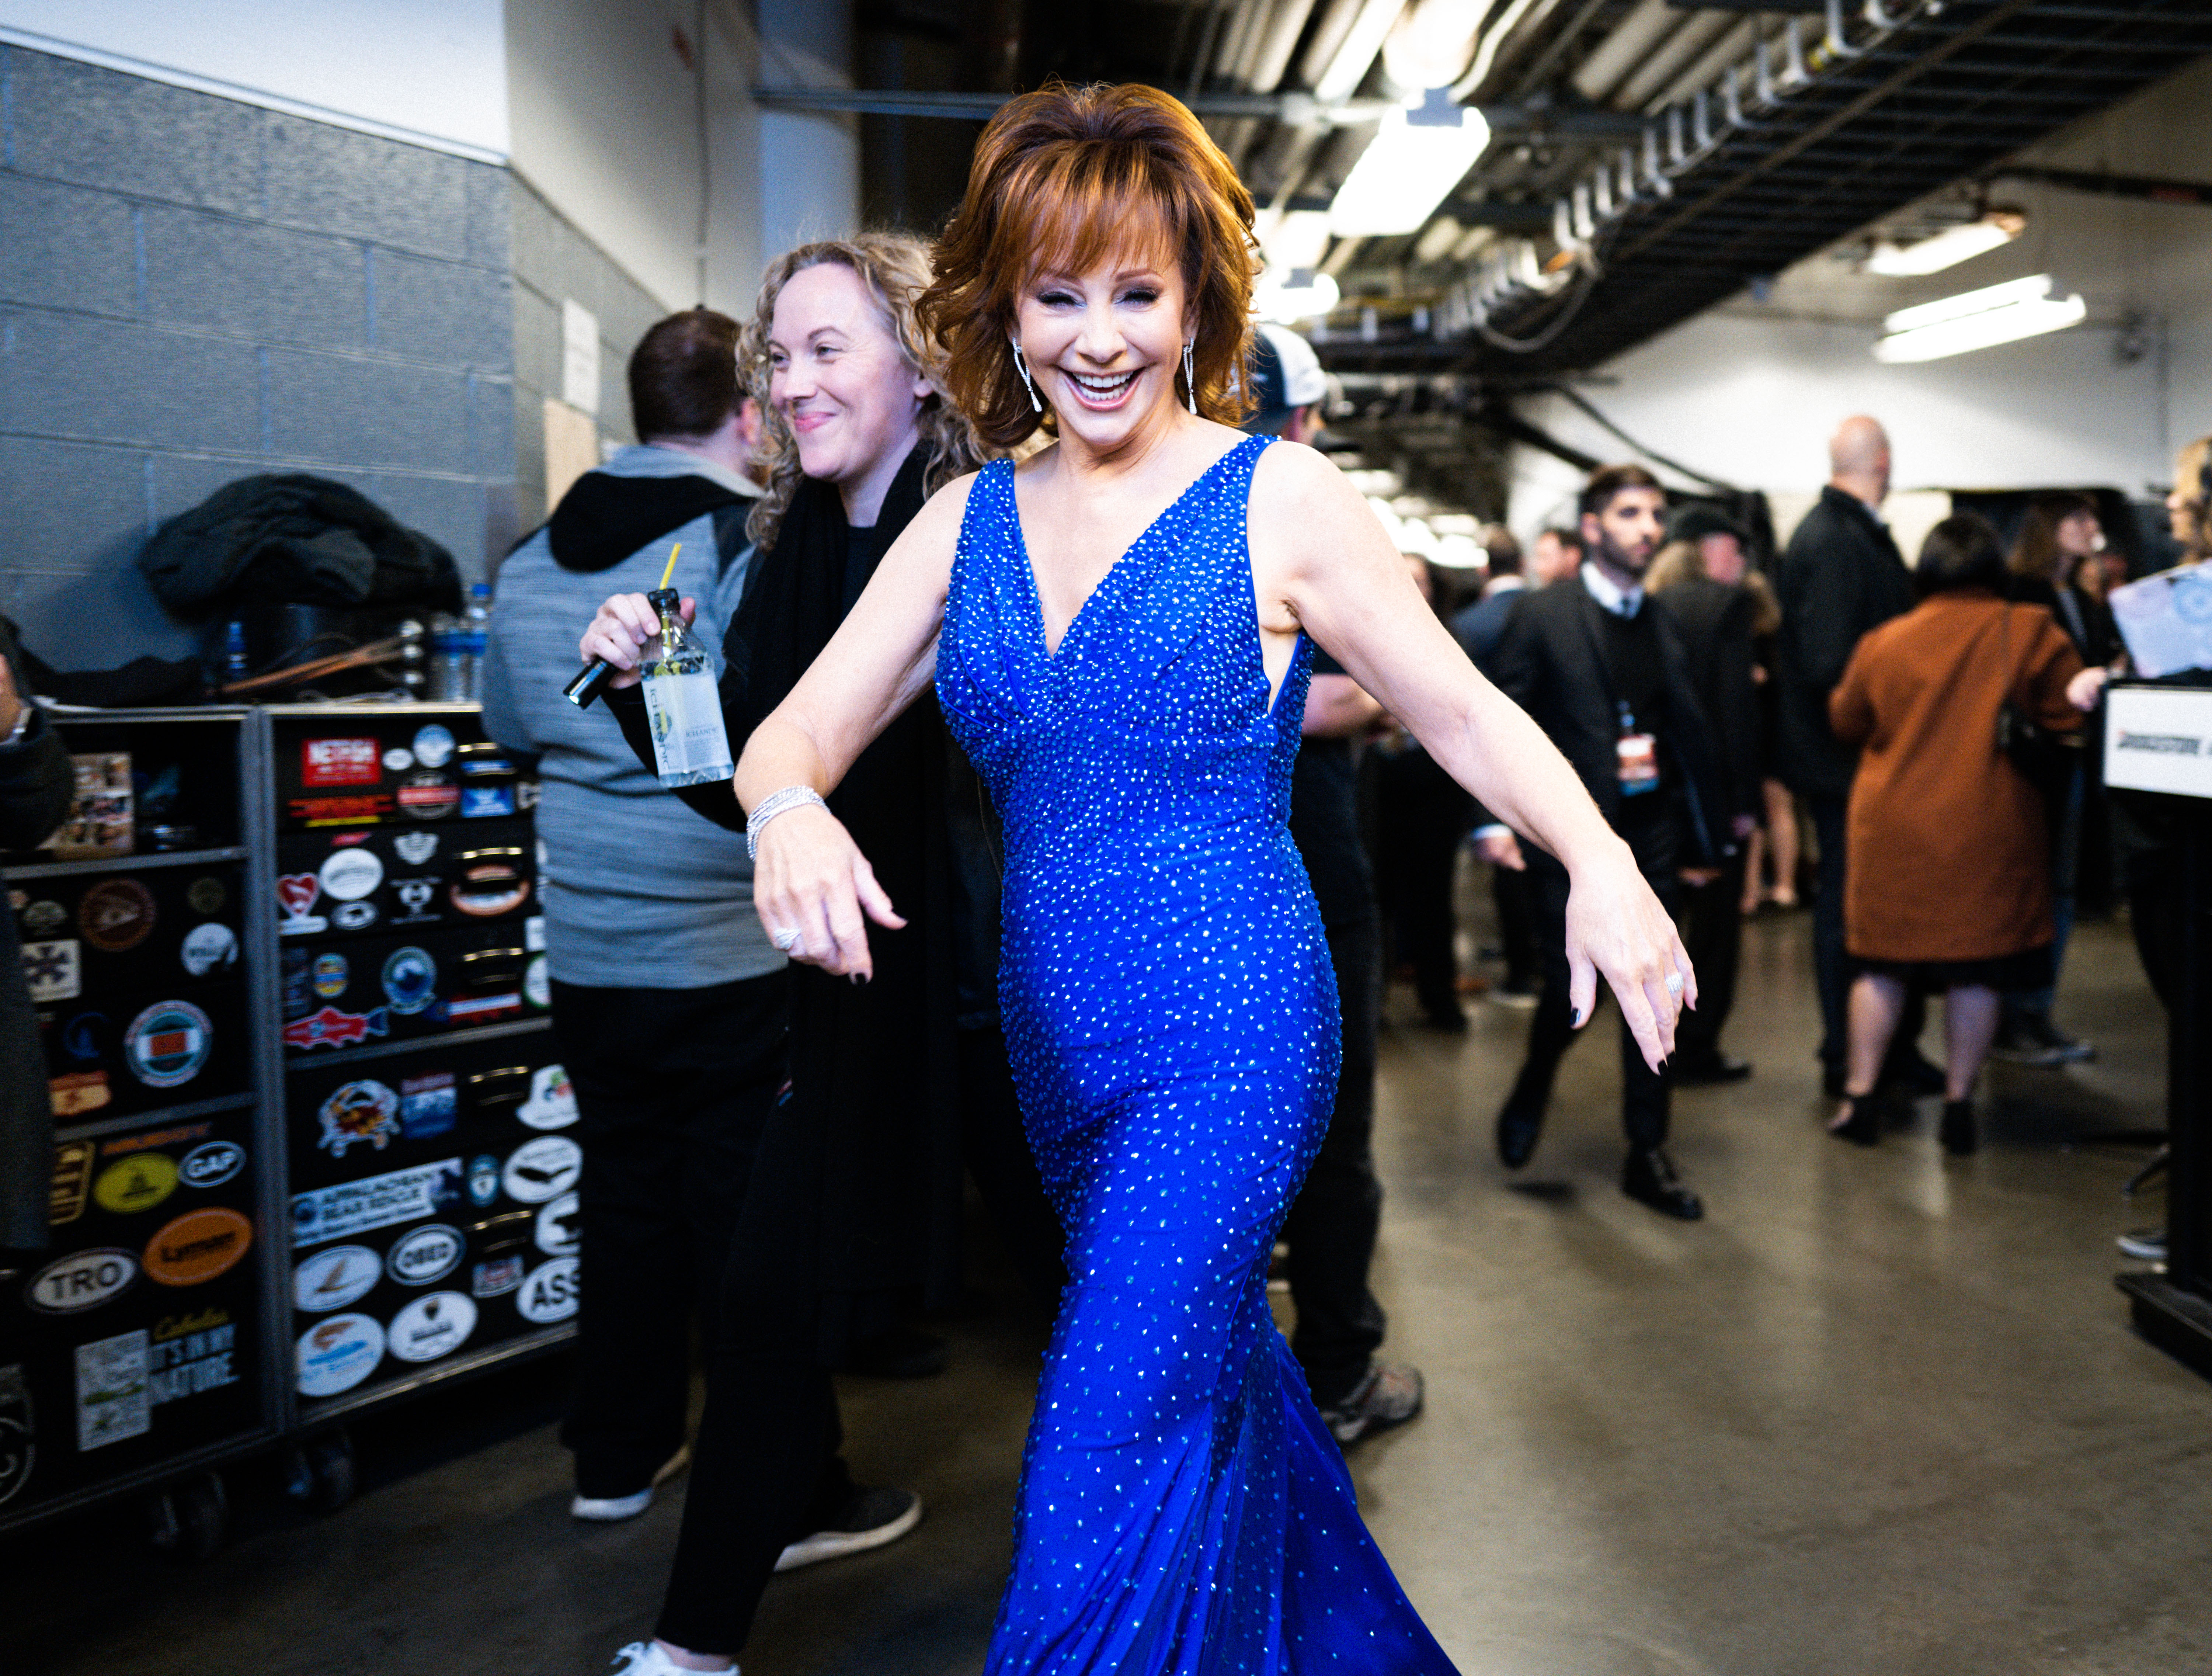 Reba McEntire on November 13, 2019 in Nashville, Tennessee | Source: Getty Images